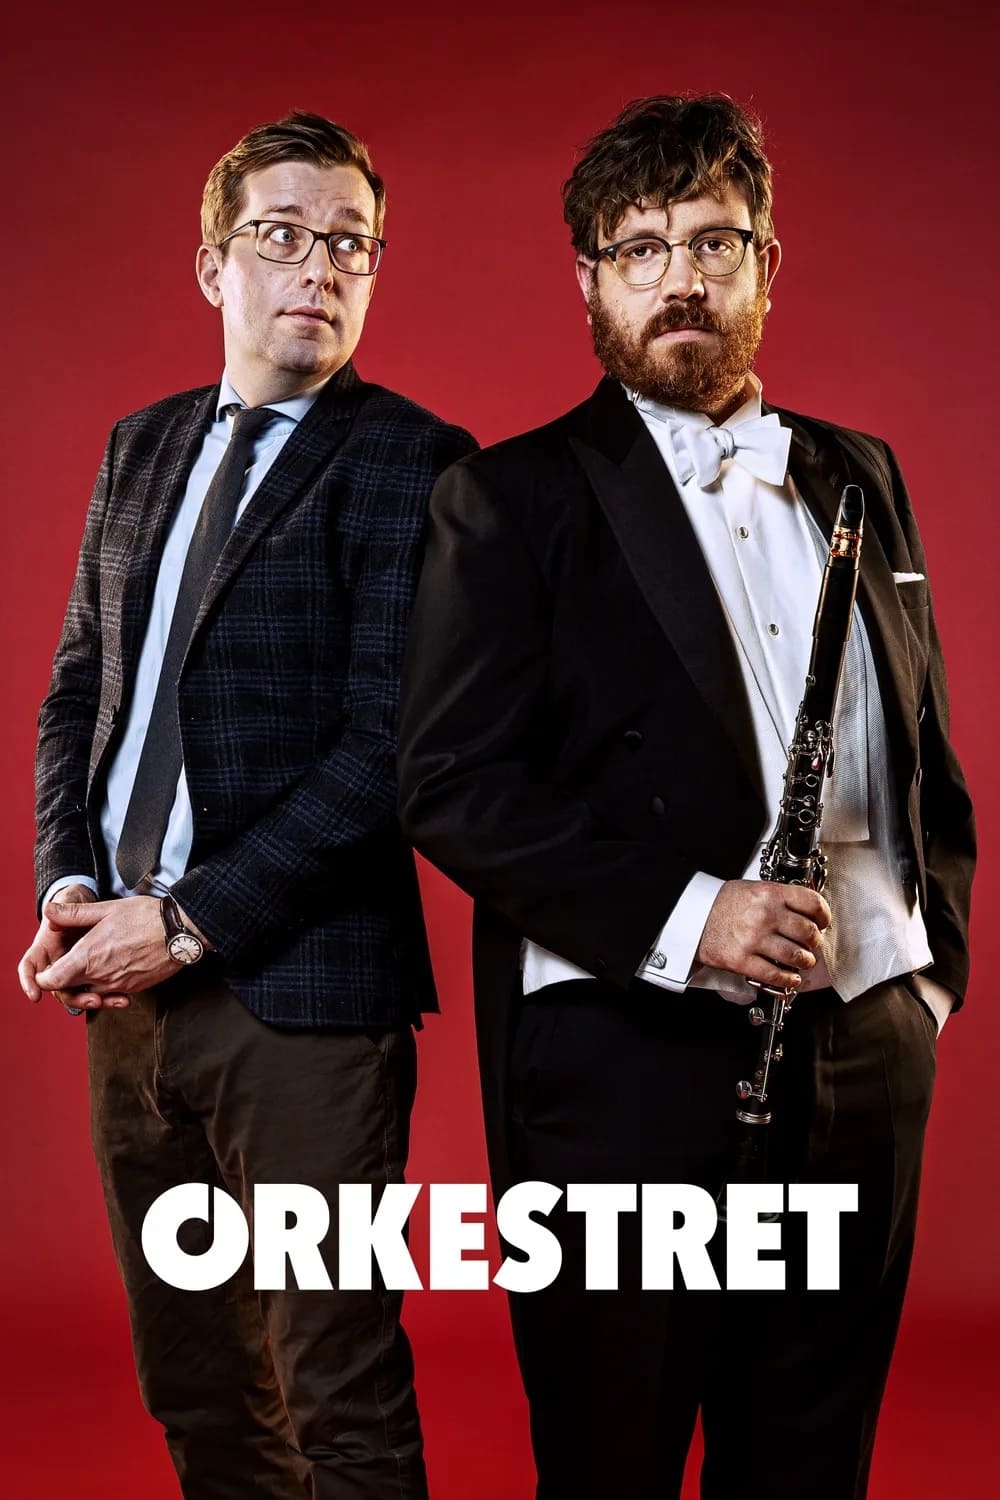 Orkestret TV Shows About Workplace